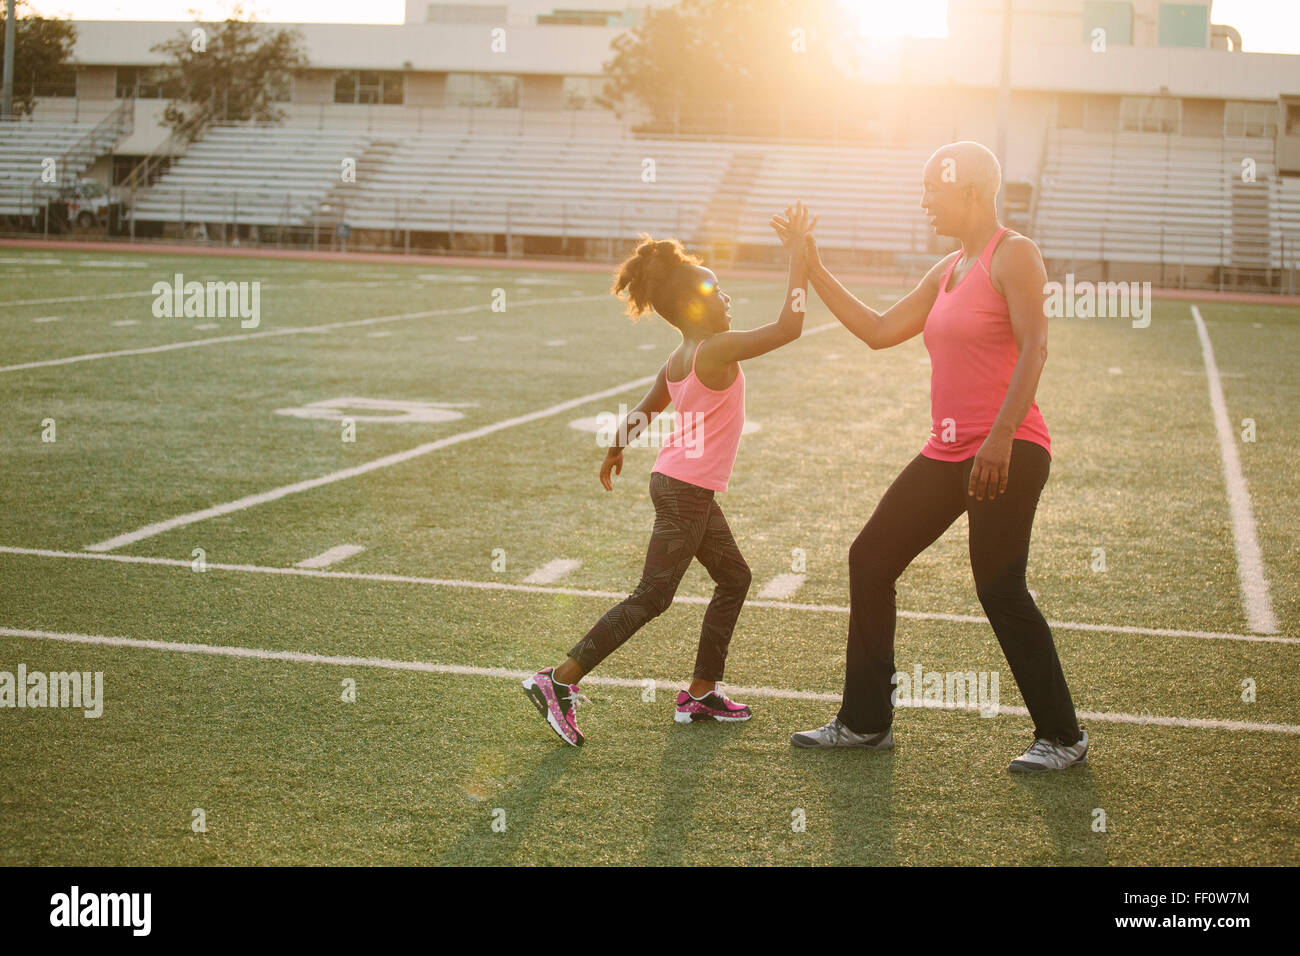 Grandmother and granddaughter high-fiving on football field Stock Photo